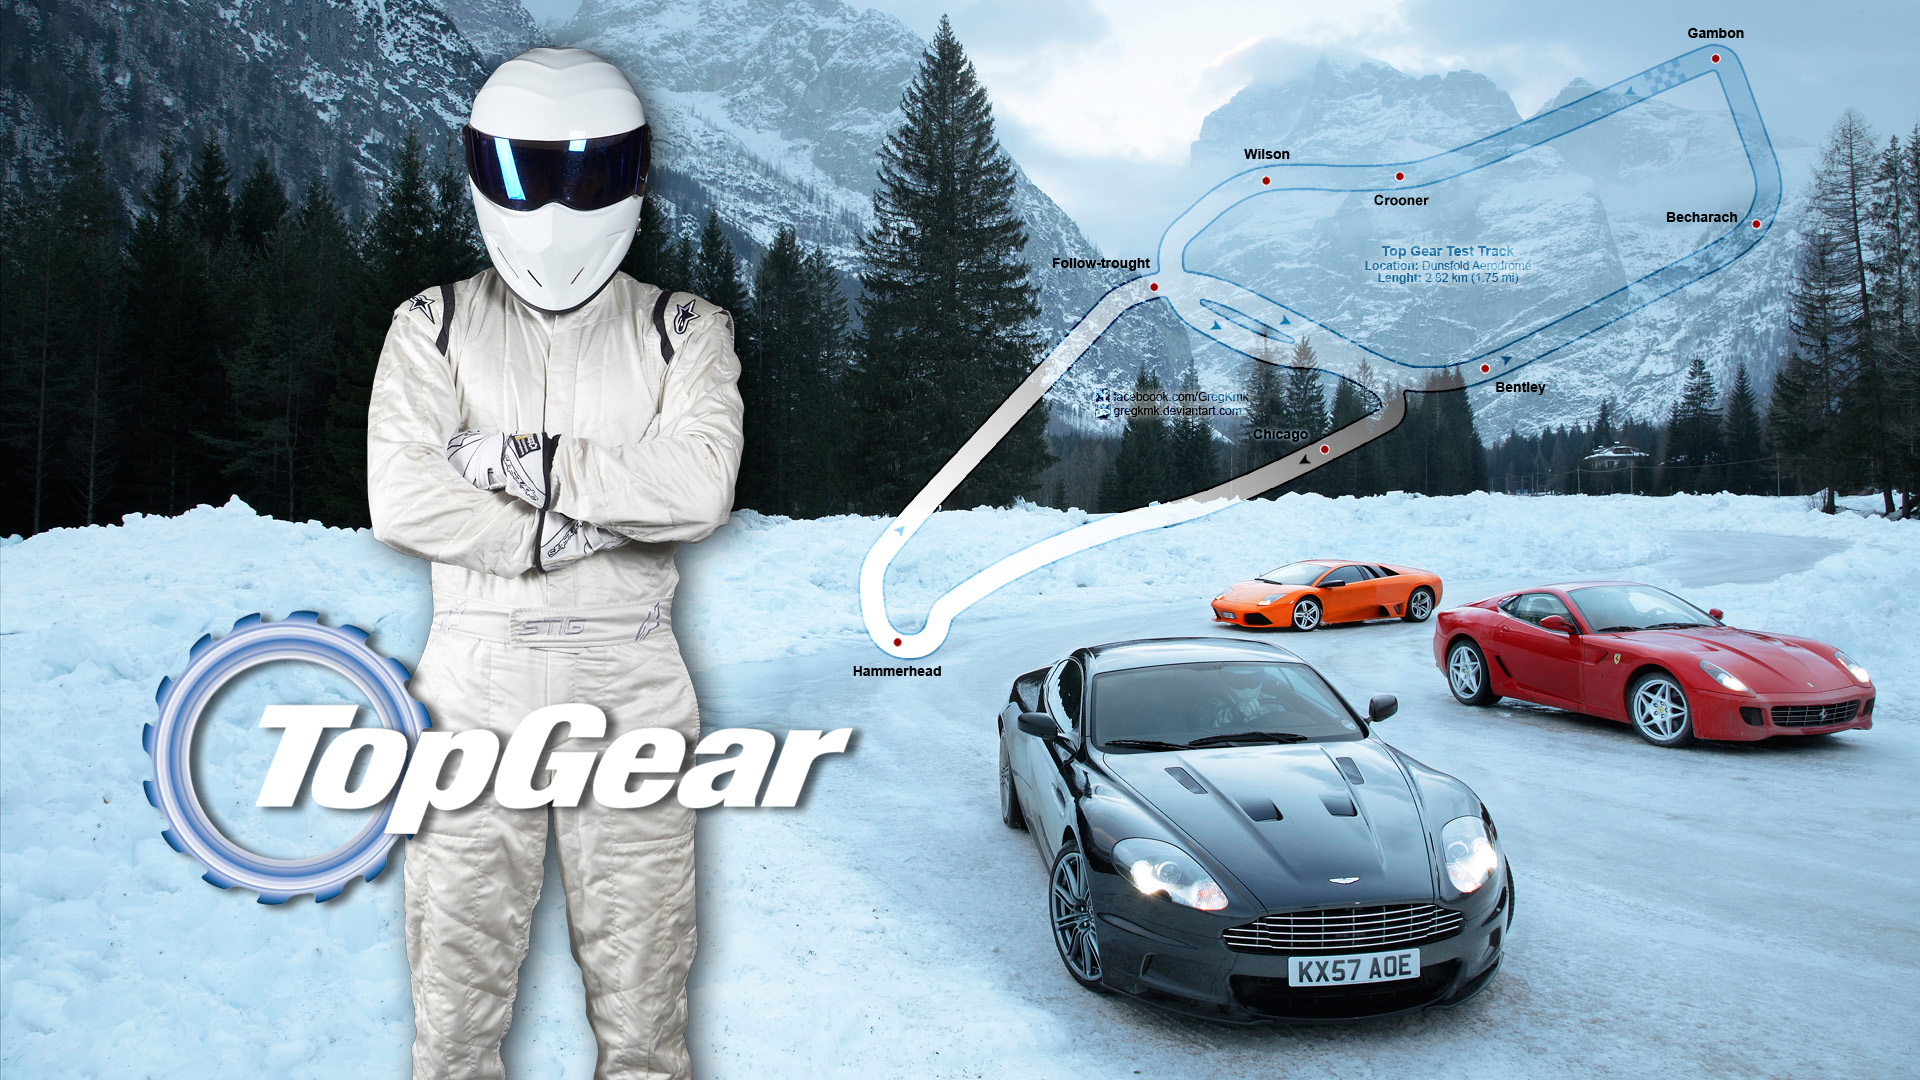 140+ Top Gear HD Wallpapers and Backgrounds